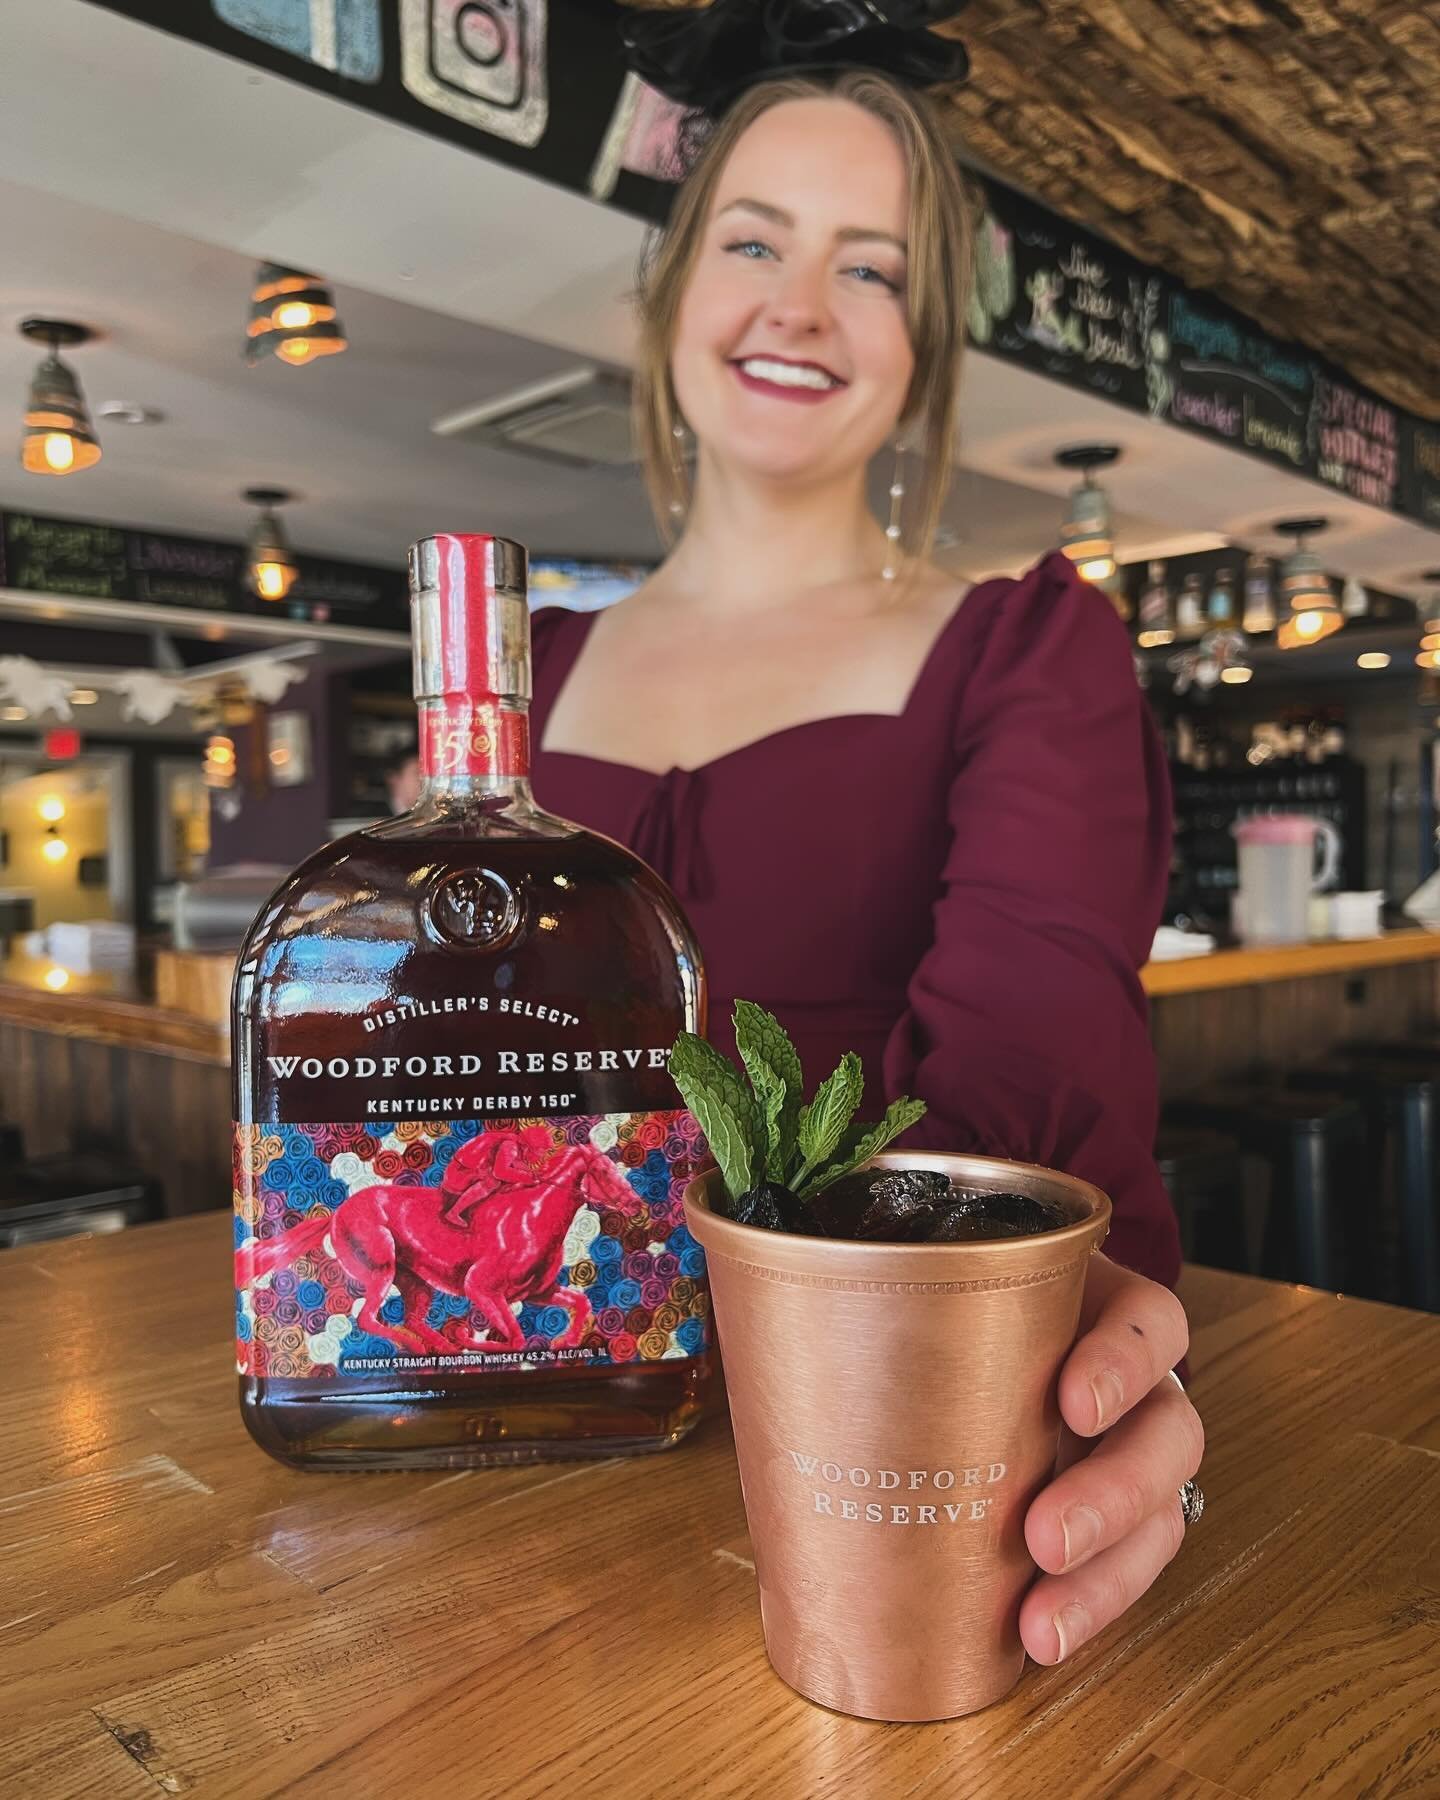 🐎DERBY DAY IS HERE!🐎 Come celebrate the Kentucky derby with us and @woodfordreserve mint julep&rsquo;s 🐴